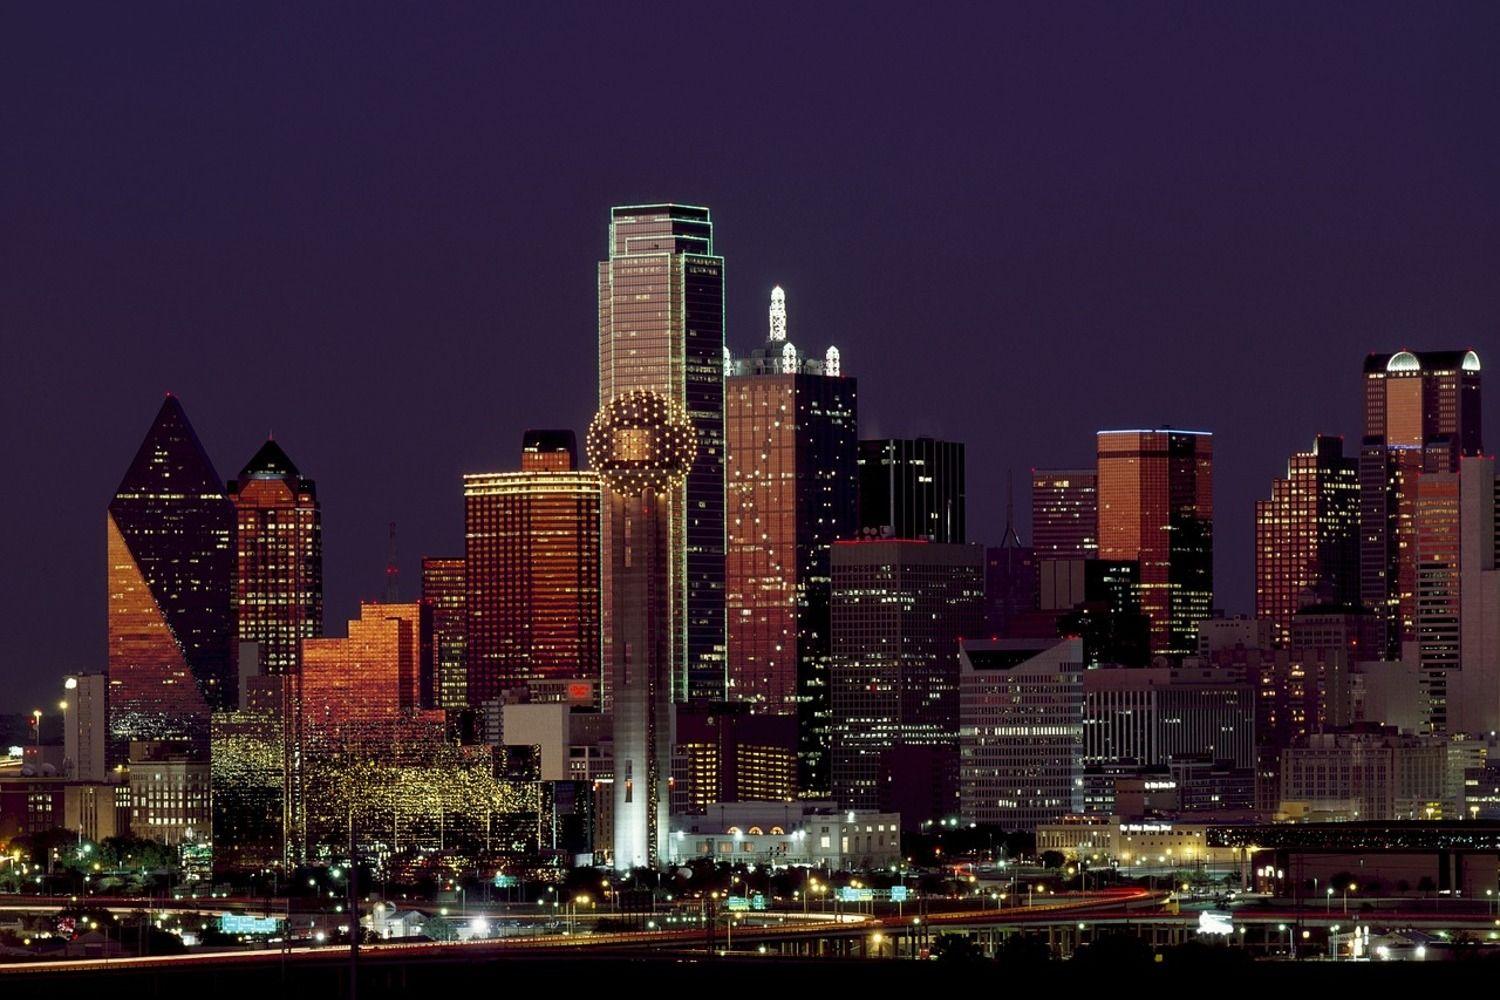 Dallas Skyline Wallpapers - Top Free Dallas Skyline Backgrounds